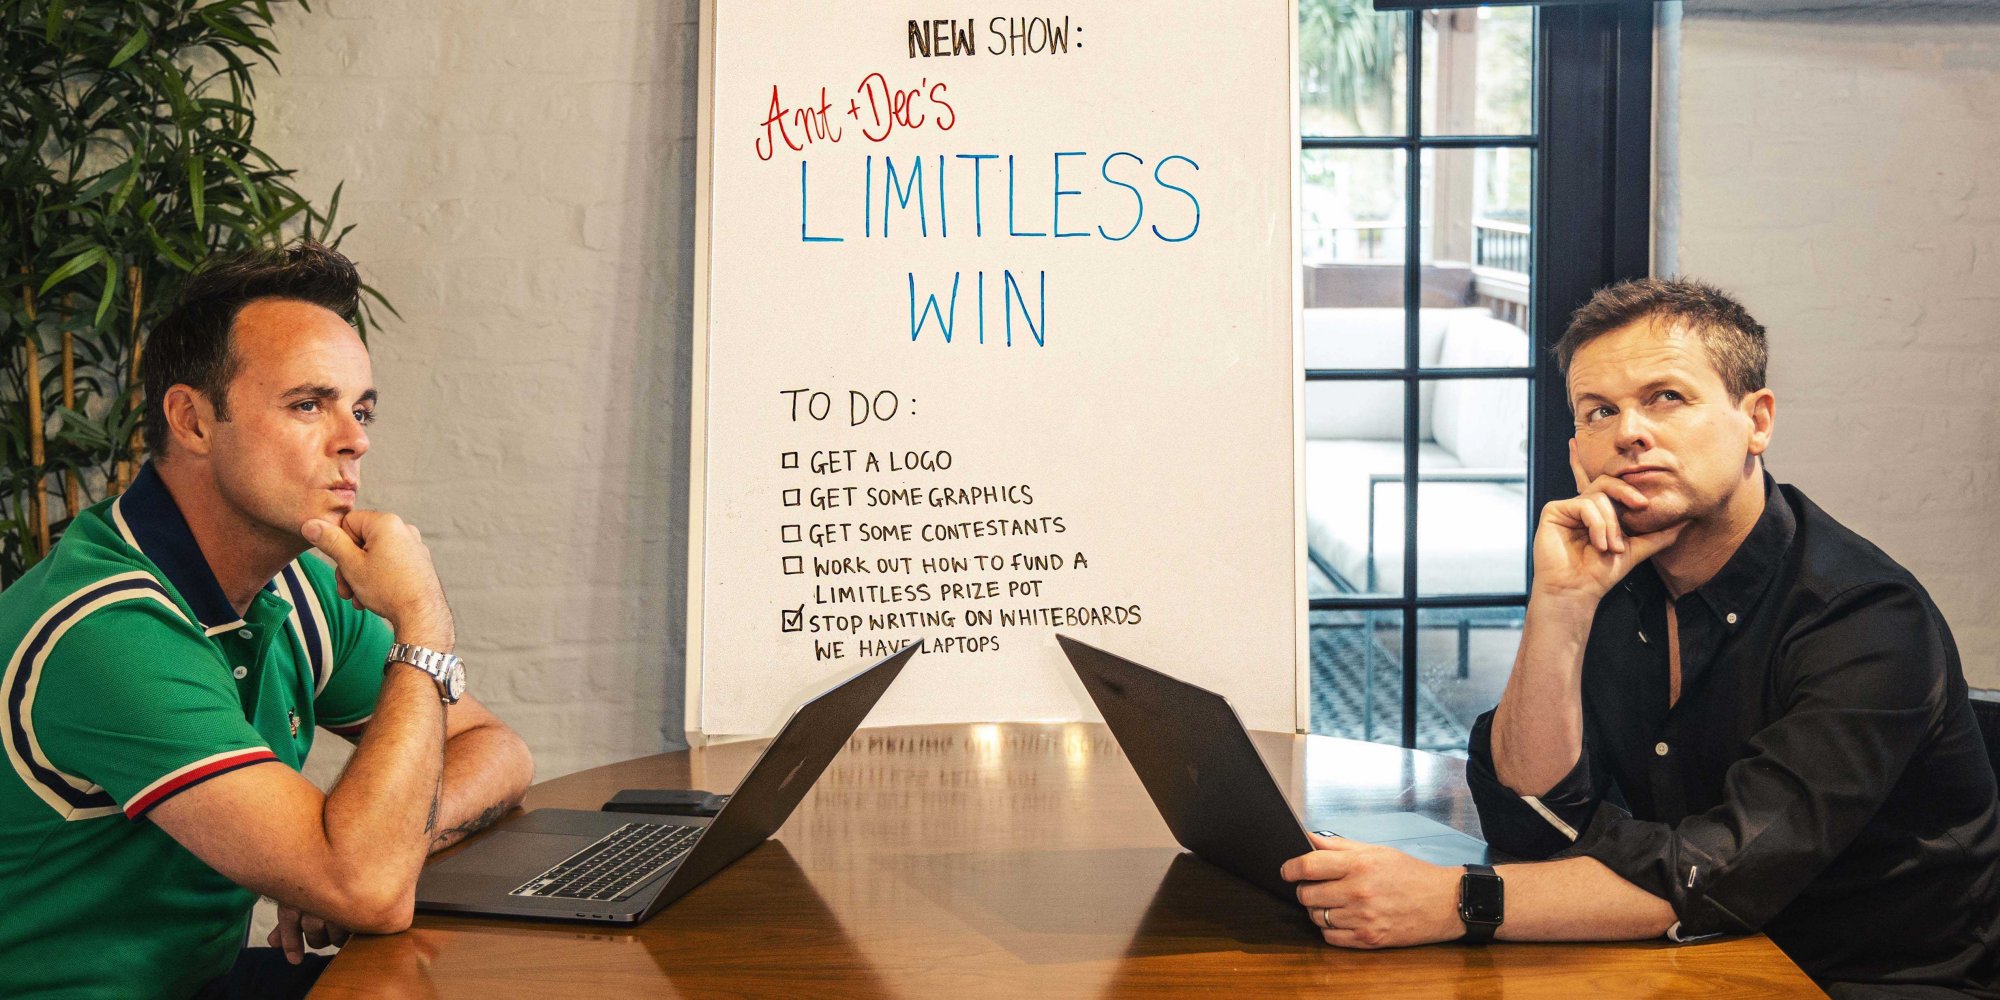 Ant & Dec’s Limitless Win: Show time!